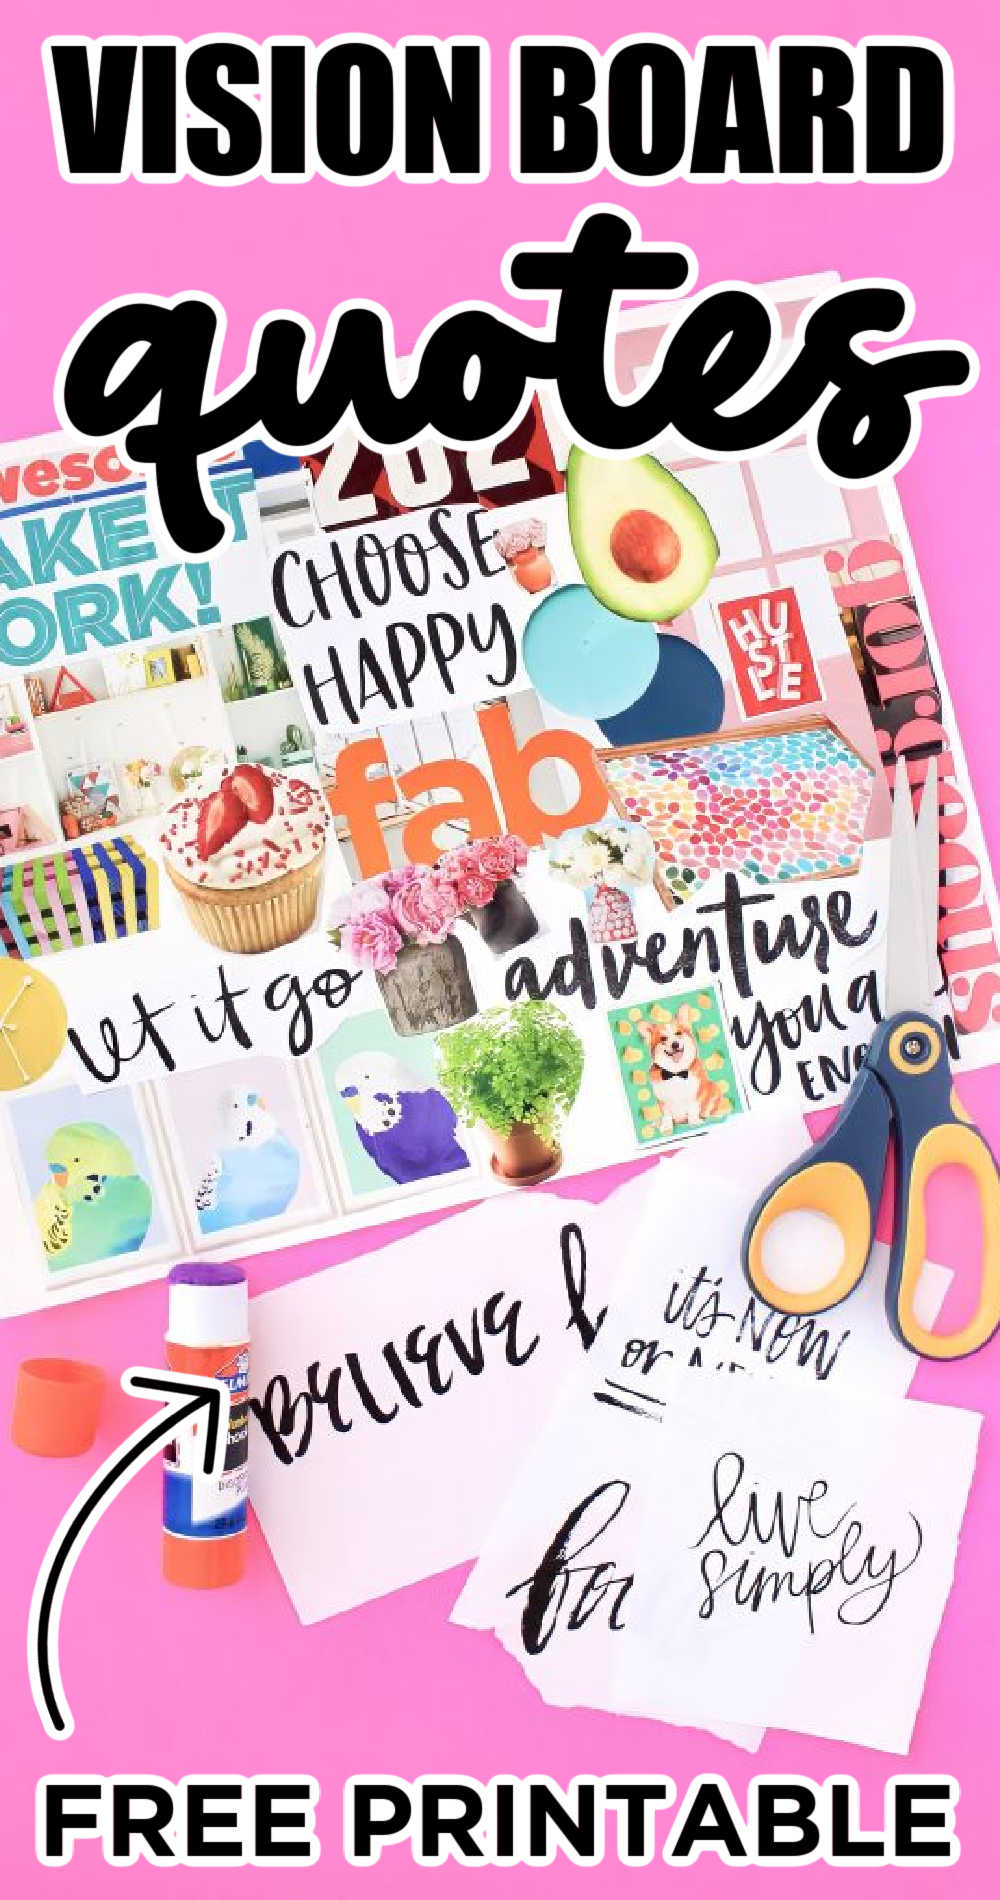 15 Inspiring 2021 Vision Board Ideas - Free Printables for Your Vision Board